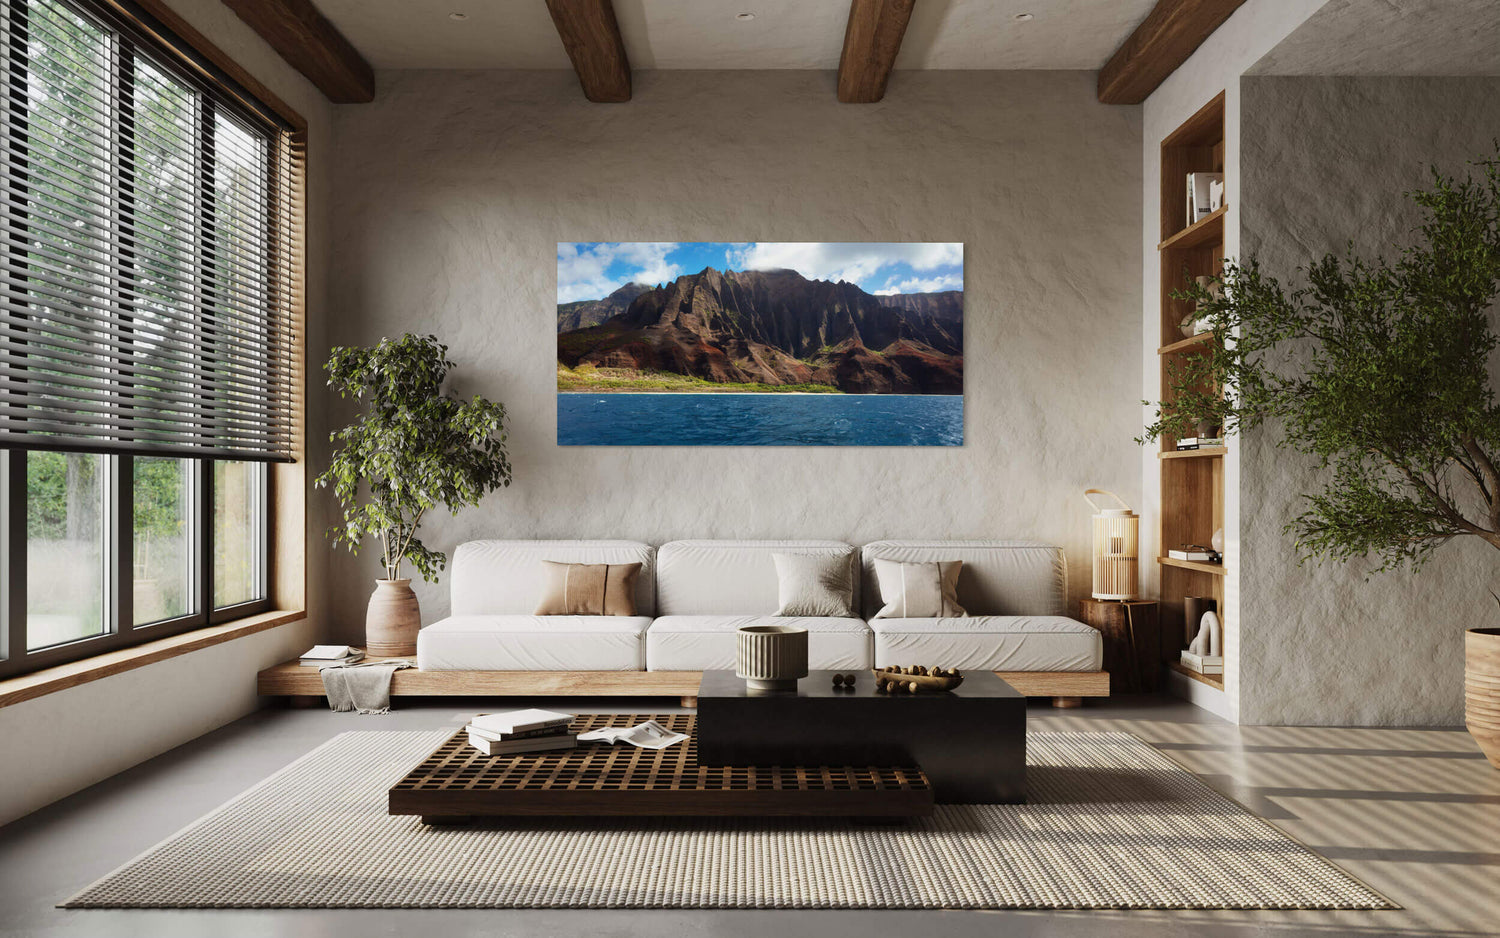 A Napali coast picture made on a Kauai boat tour hangs in a living room.